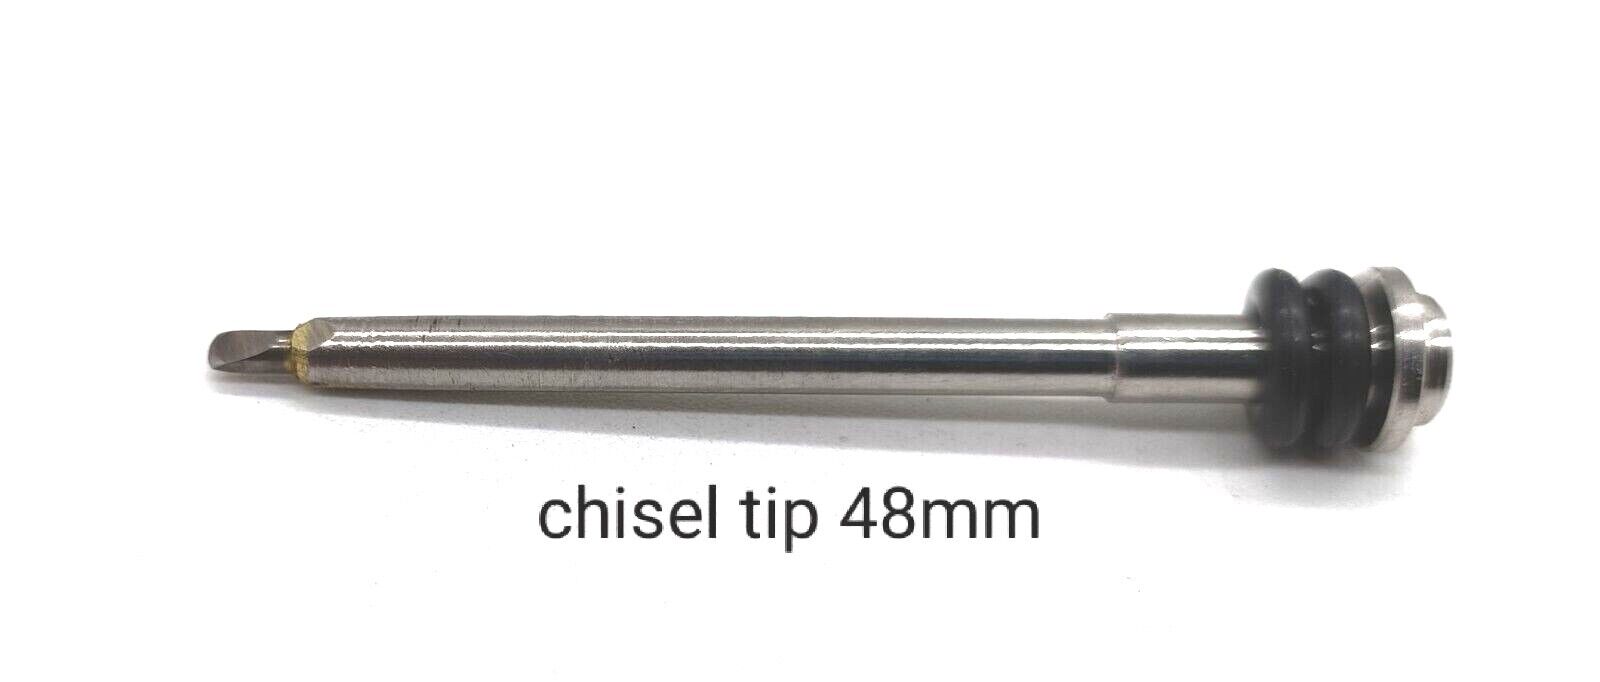 Tips For CHICAGO Pneumatic Cp-9361 Air Scribe,tungsten, DIAMOND,CHISEL,carbide .